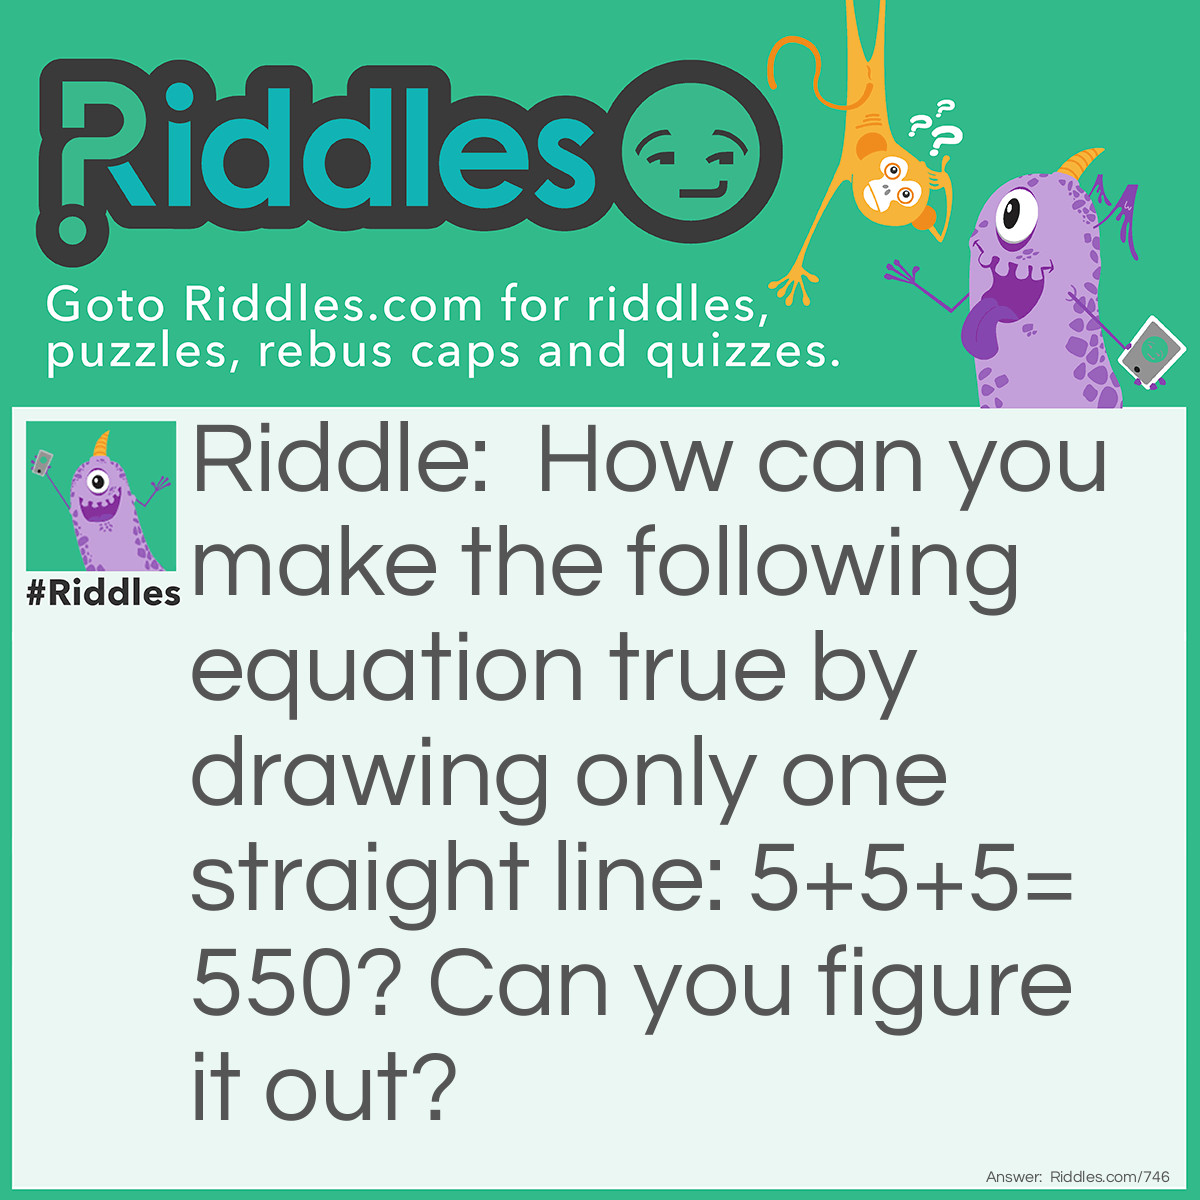 Riddle: How can you make the following equation true by drawing only one straight line: 5+5+5=550? Can you figure it out? Answer: Draw a line on the first plus sign that turns it into a 4! The equation then becomes true: 545+5=550. You could also change the equal symbol to a crossed out equal symbol which means "not equal to".